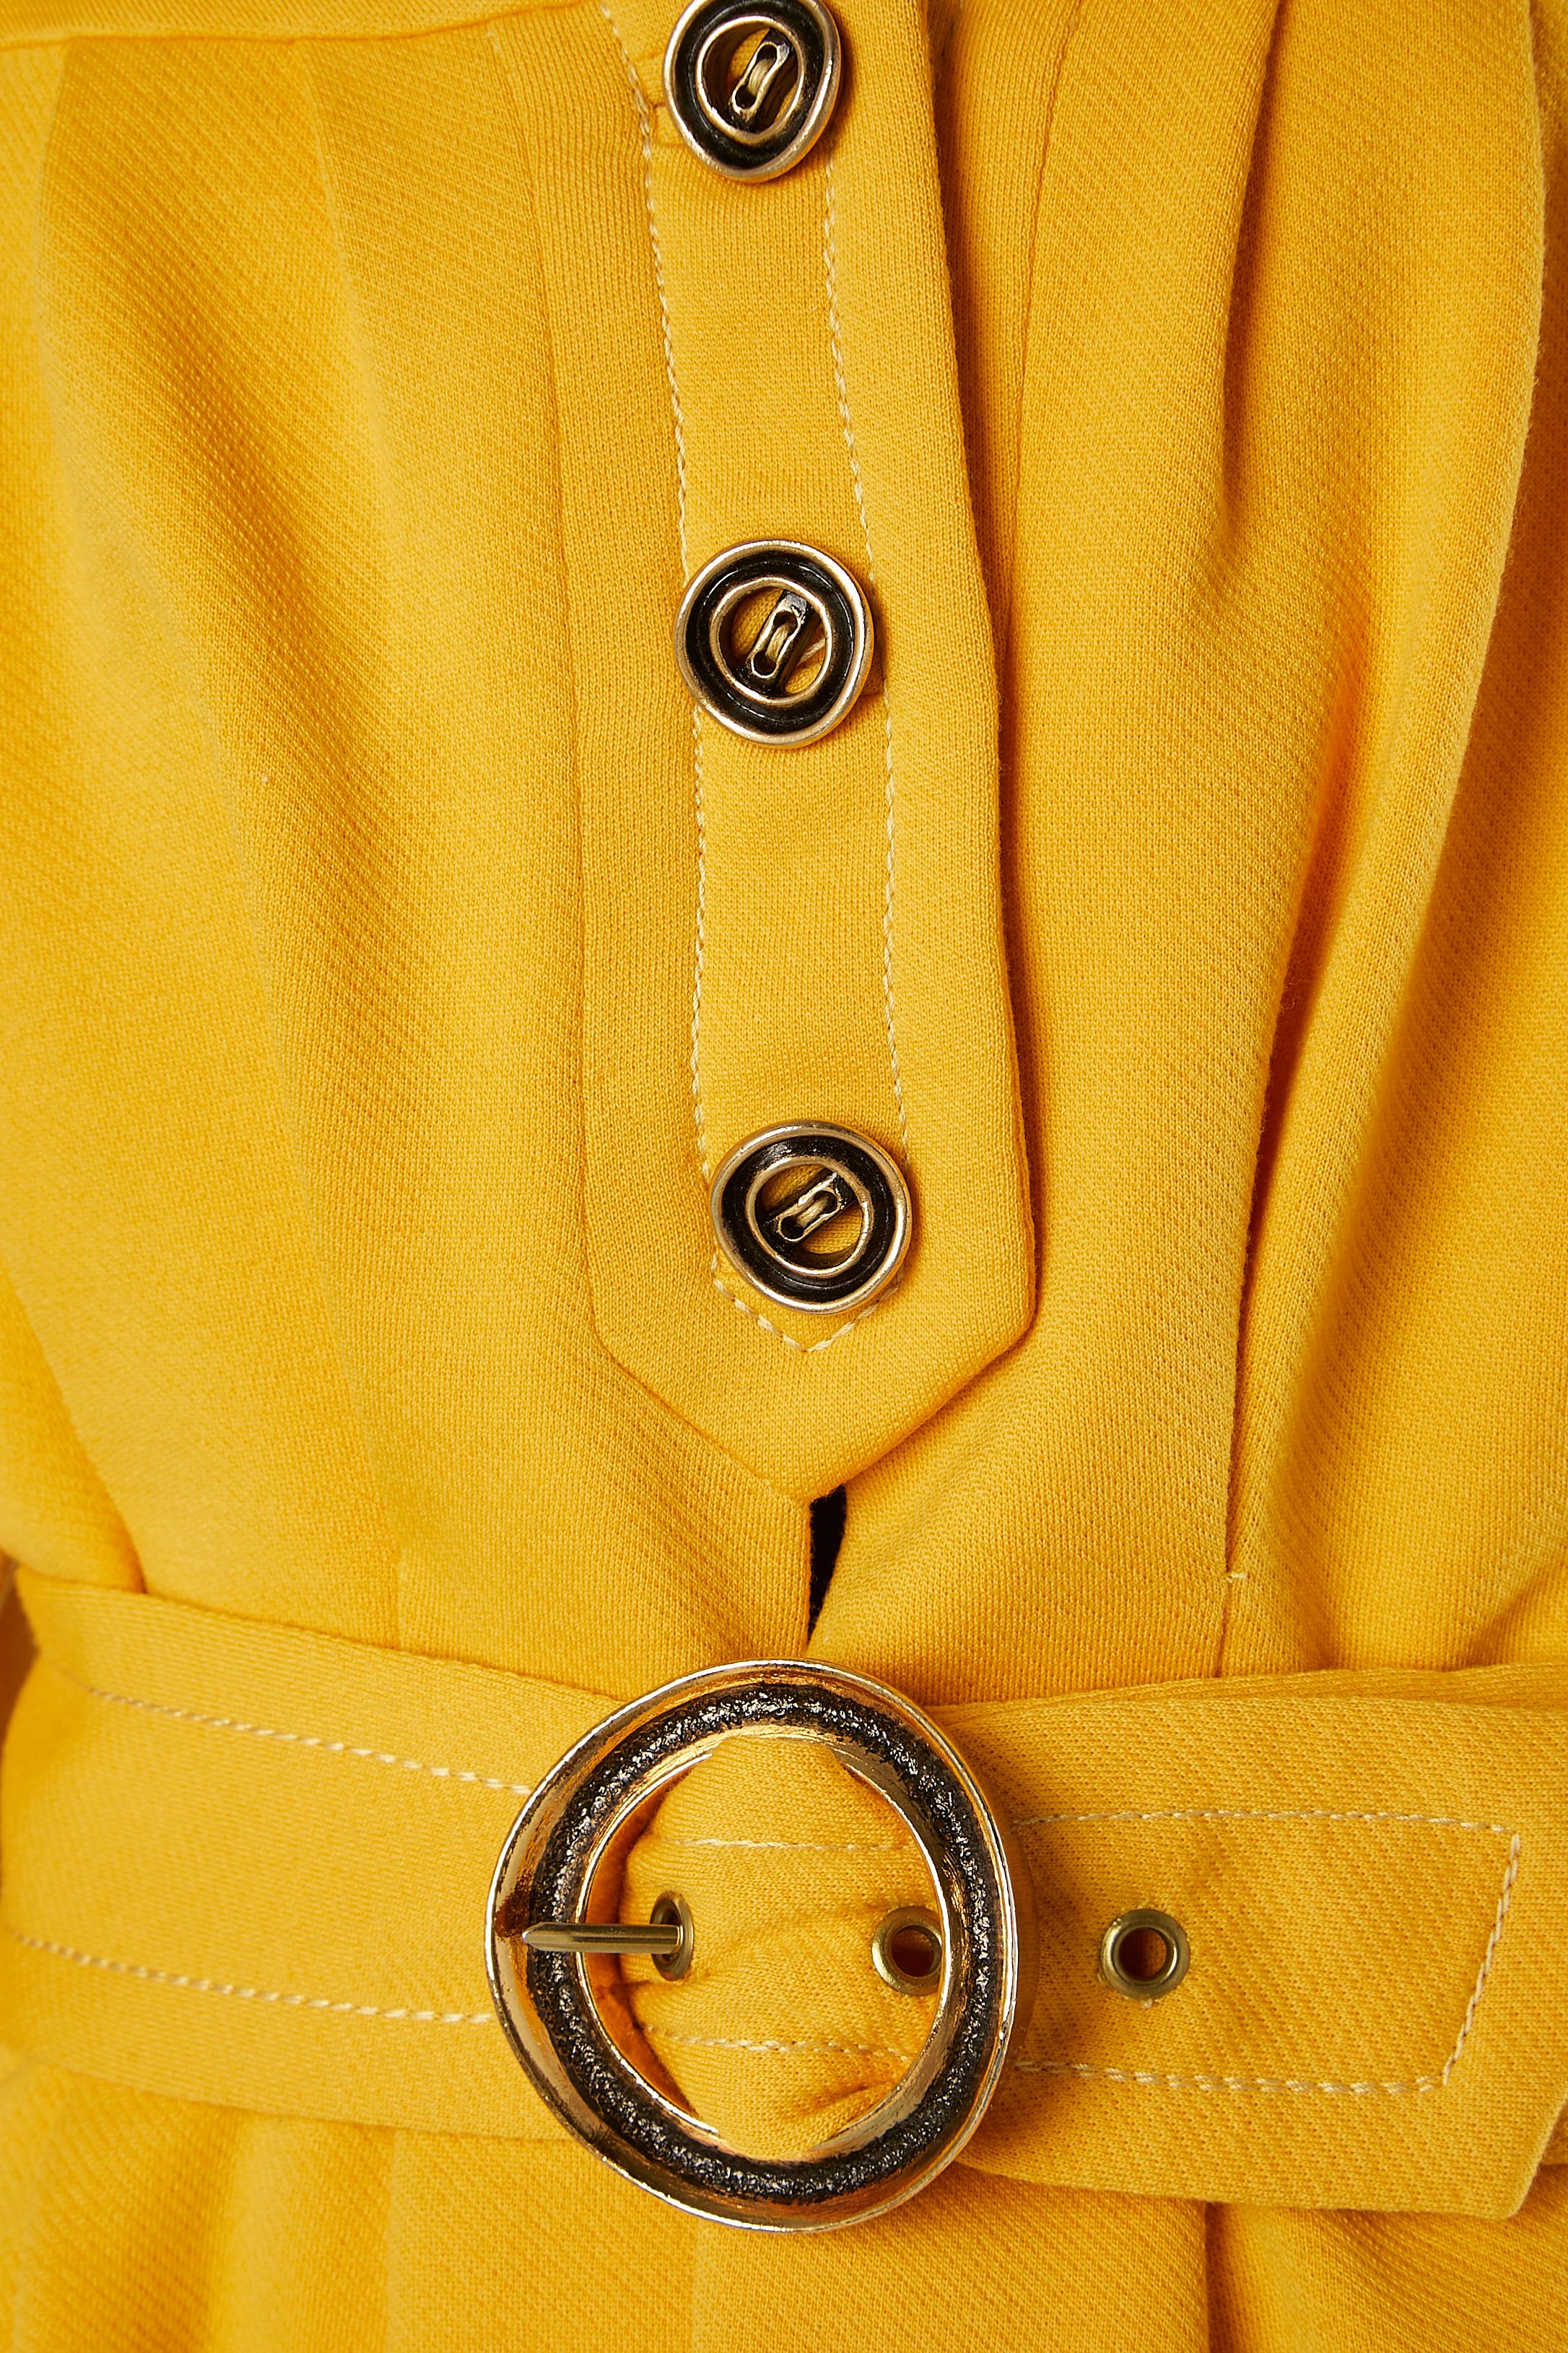 Orange Wool jersey trouser and jacket ensemble with belt Circa 1970 's  For Sale